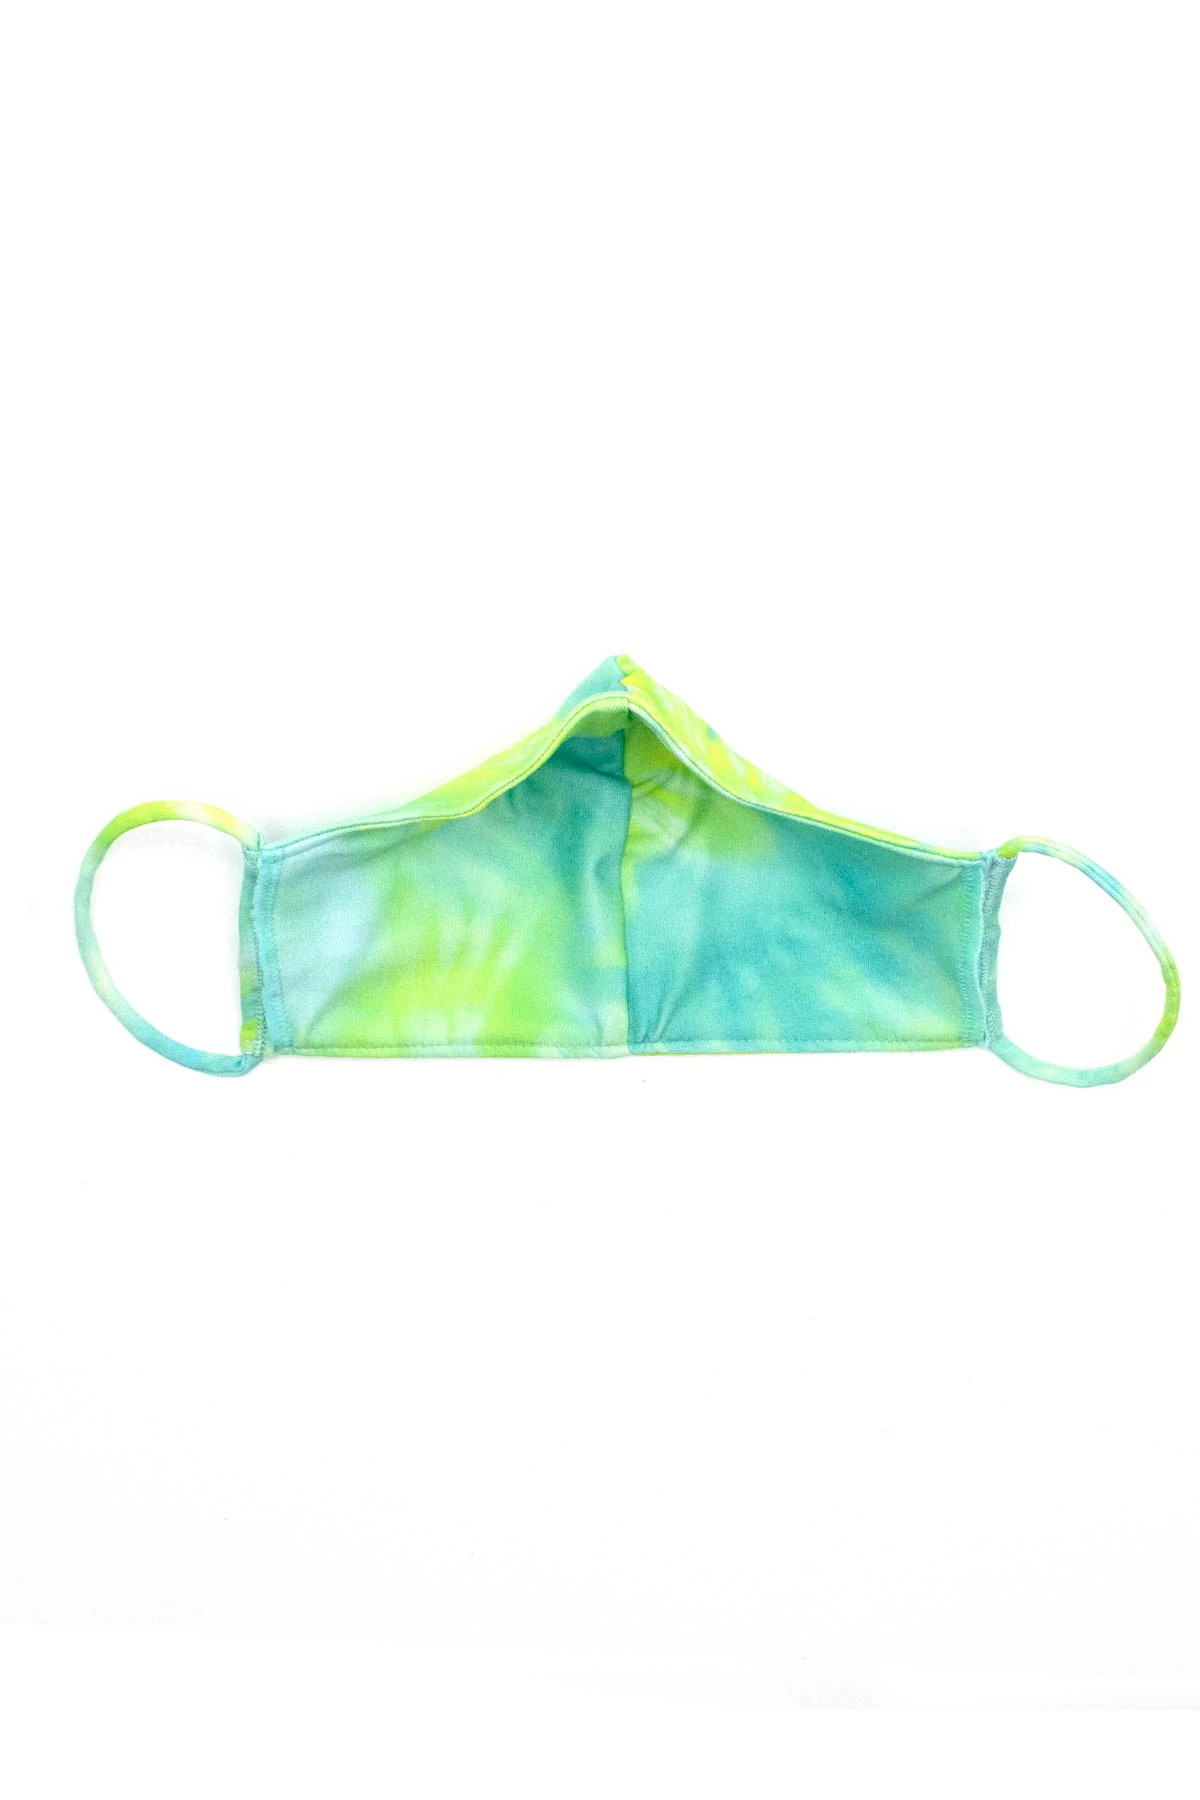 MULTI Lagoon Tie Dye Adult Face Mask image number 2